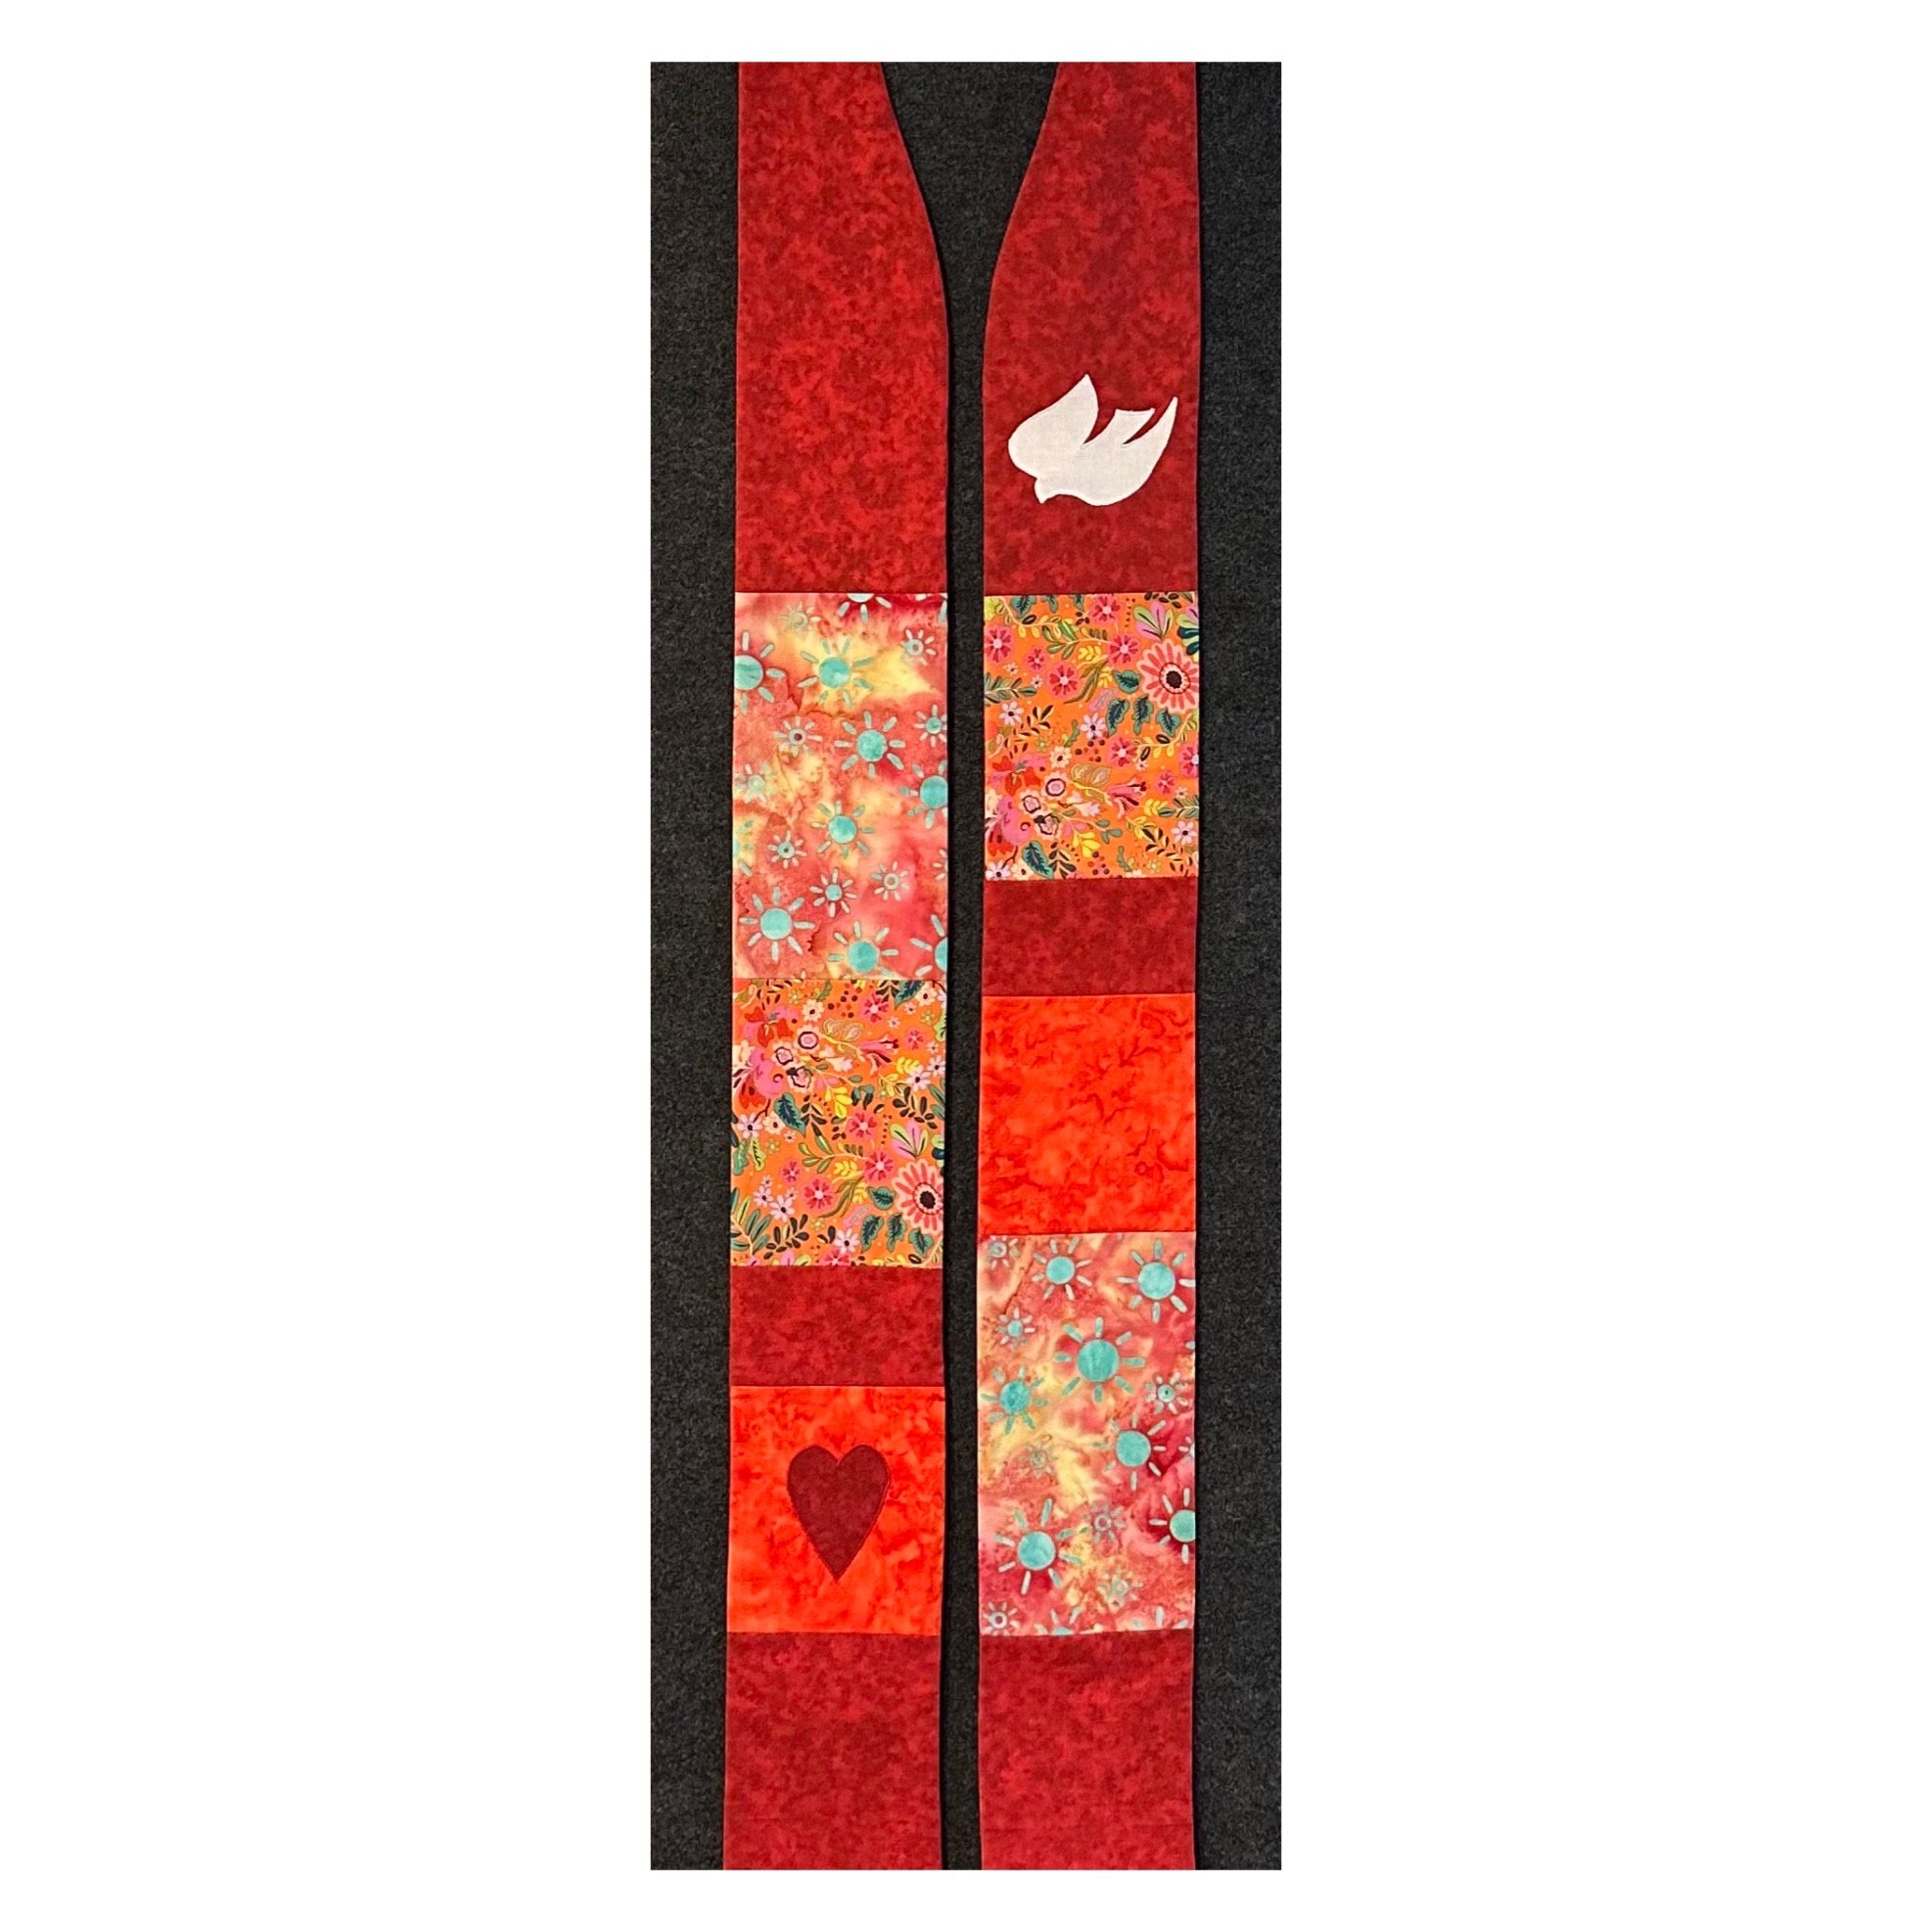 Celebrate a milestone in ministry with our new ordination designs in the Red Clergy Stole Collection. Each stole is crafted to honor dedication and service, ensuring that the special day is marked with beauty and reverence. ✨ #ClergyStoles #Ordinatio